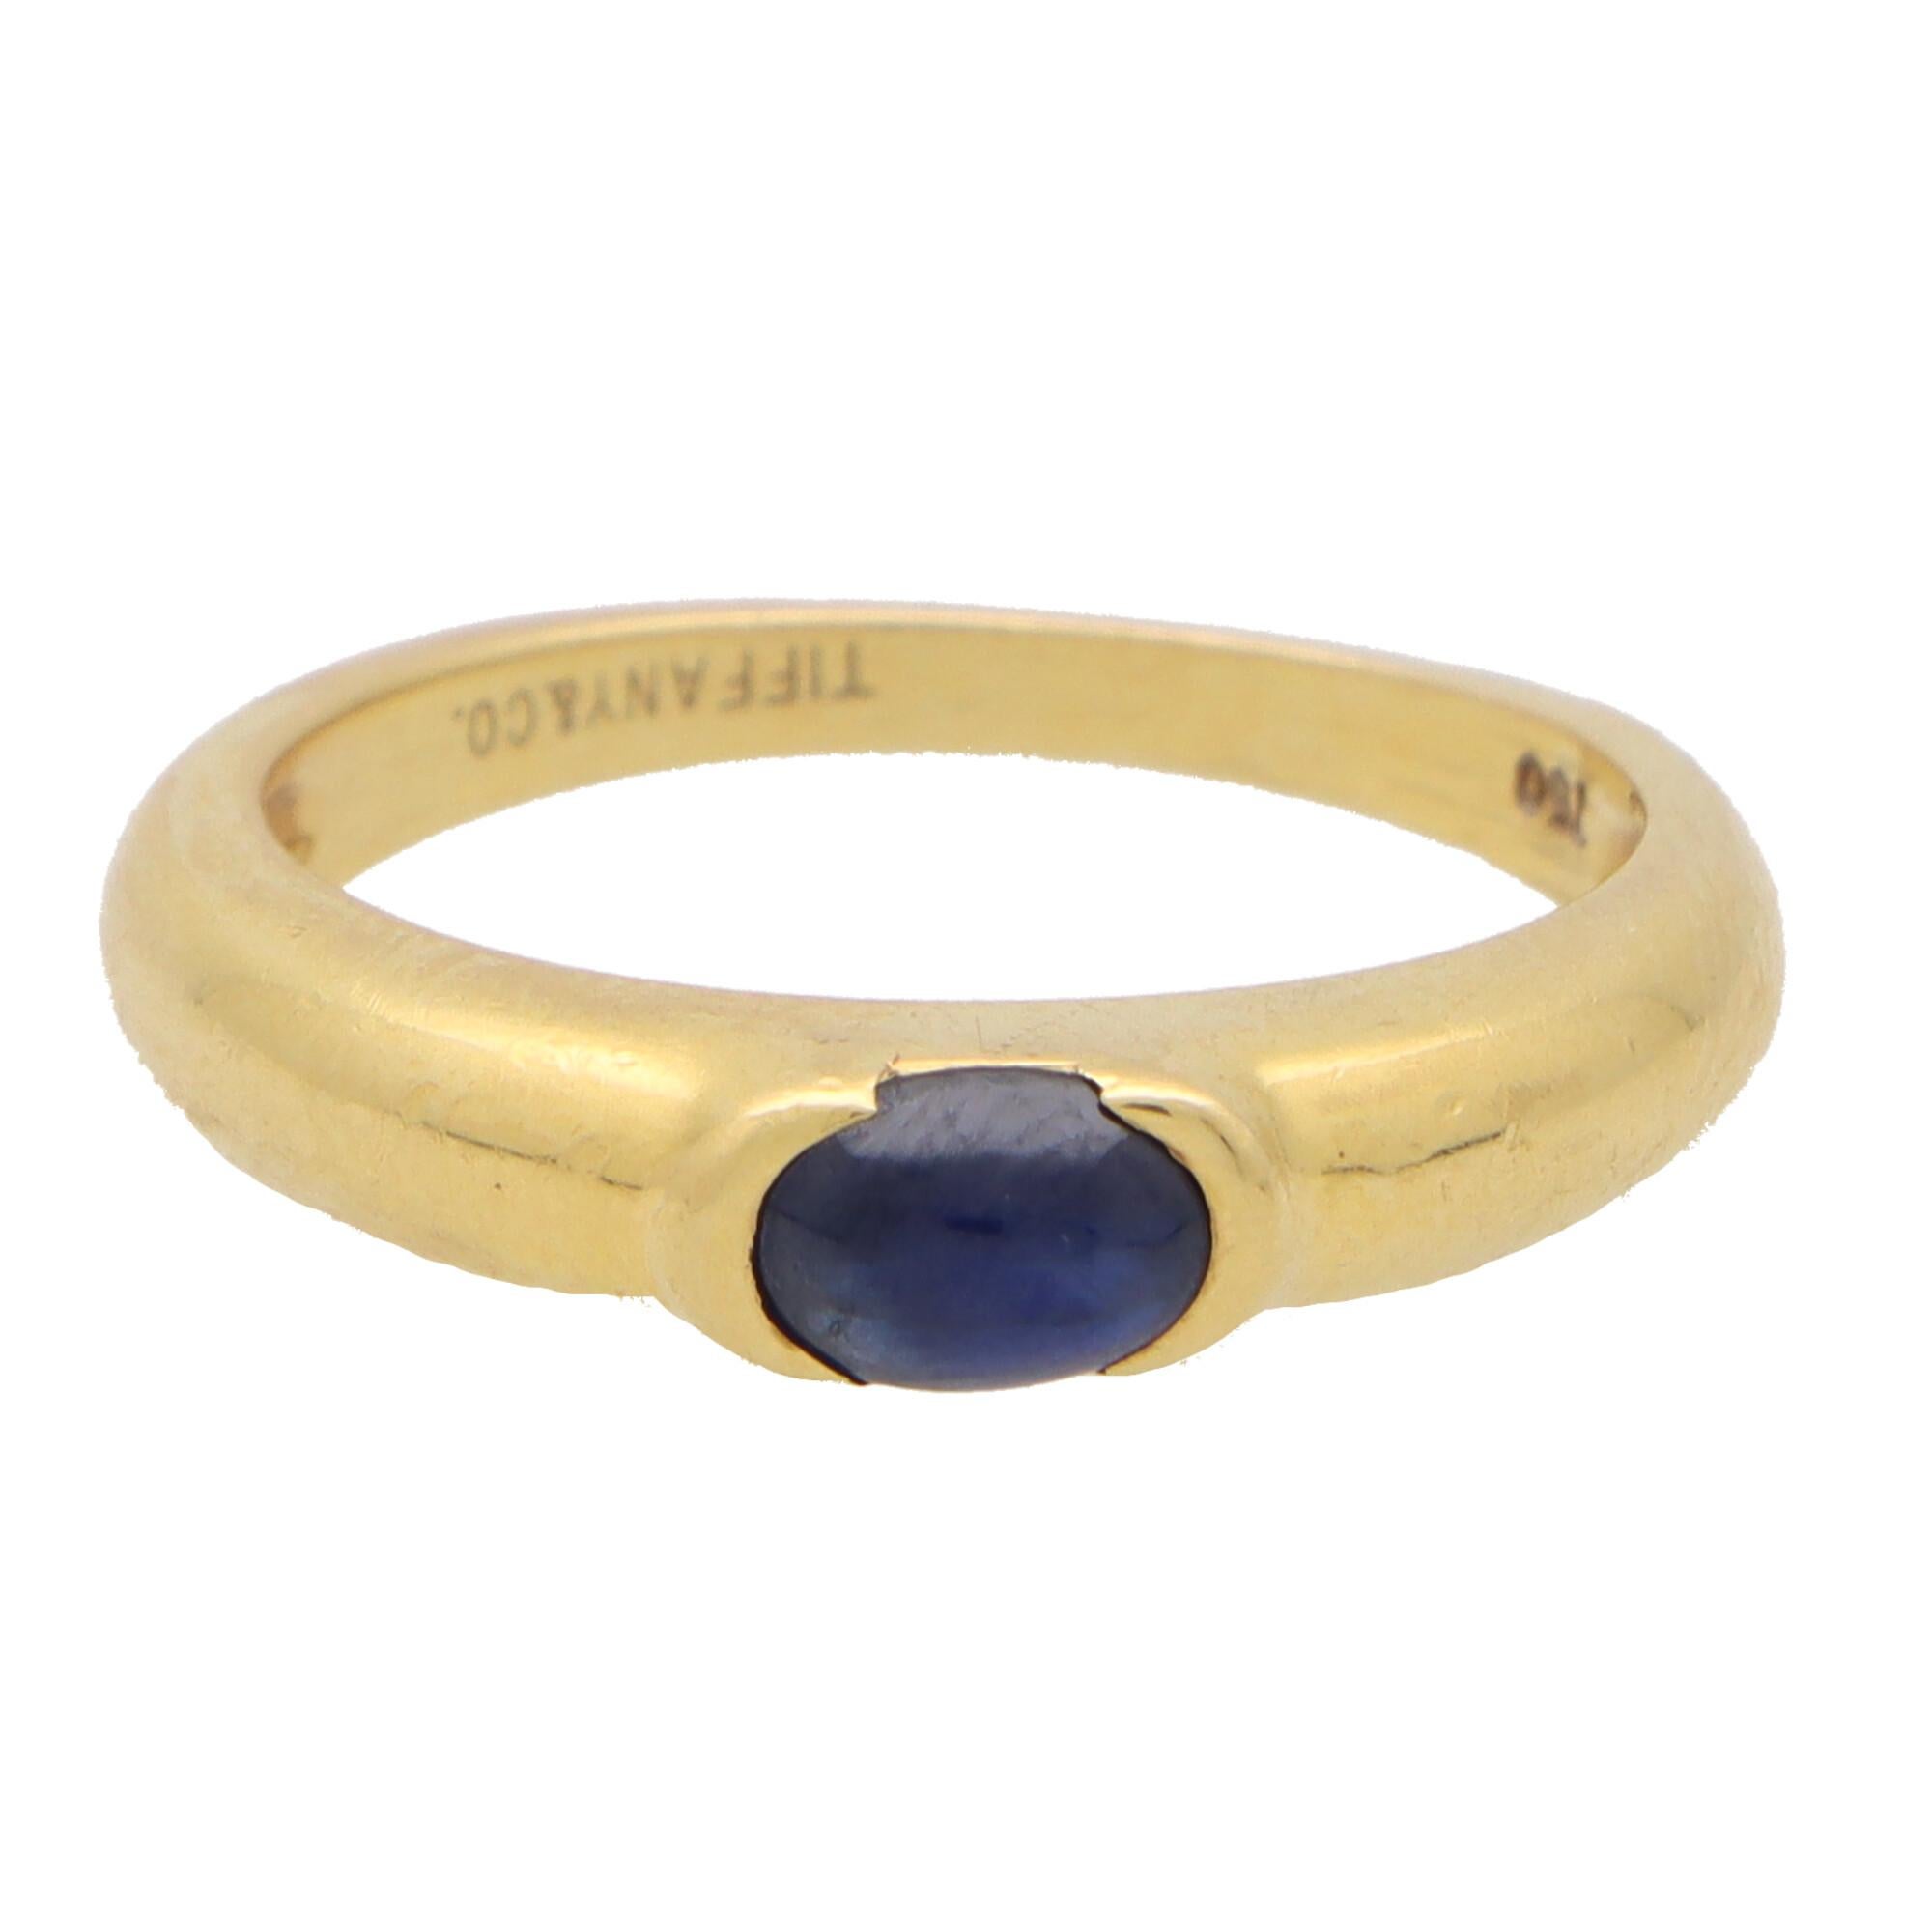 Cabochon Vintage Tiffany & Co. Sapphire Band Ring Set in 18k Yellow Gold